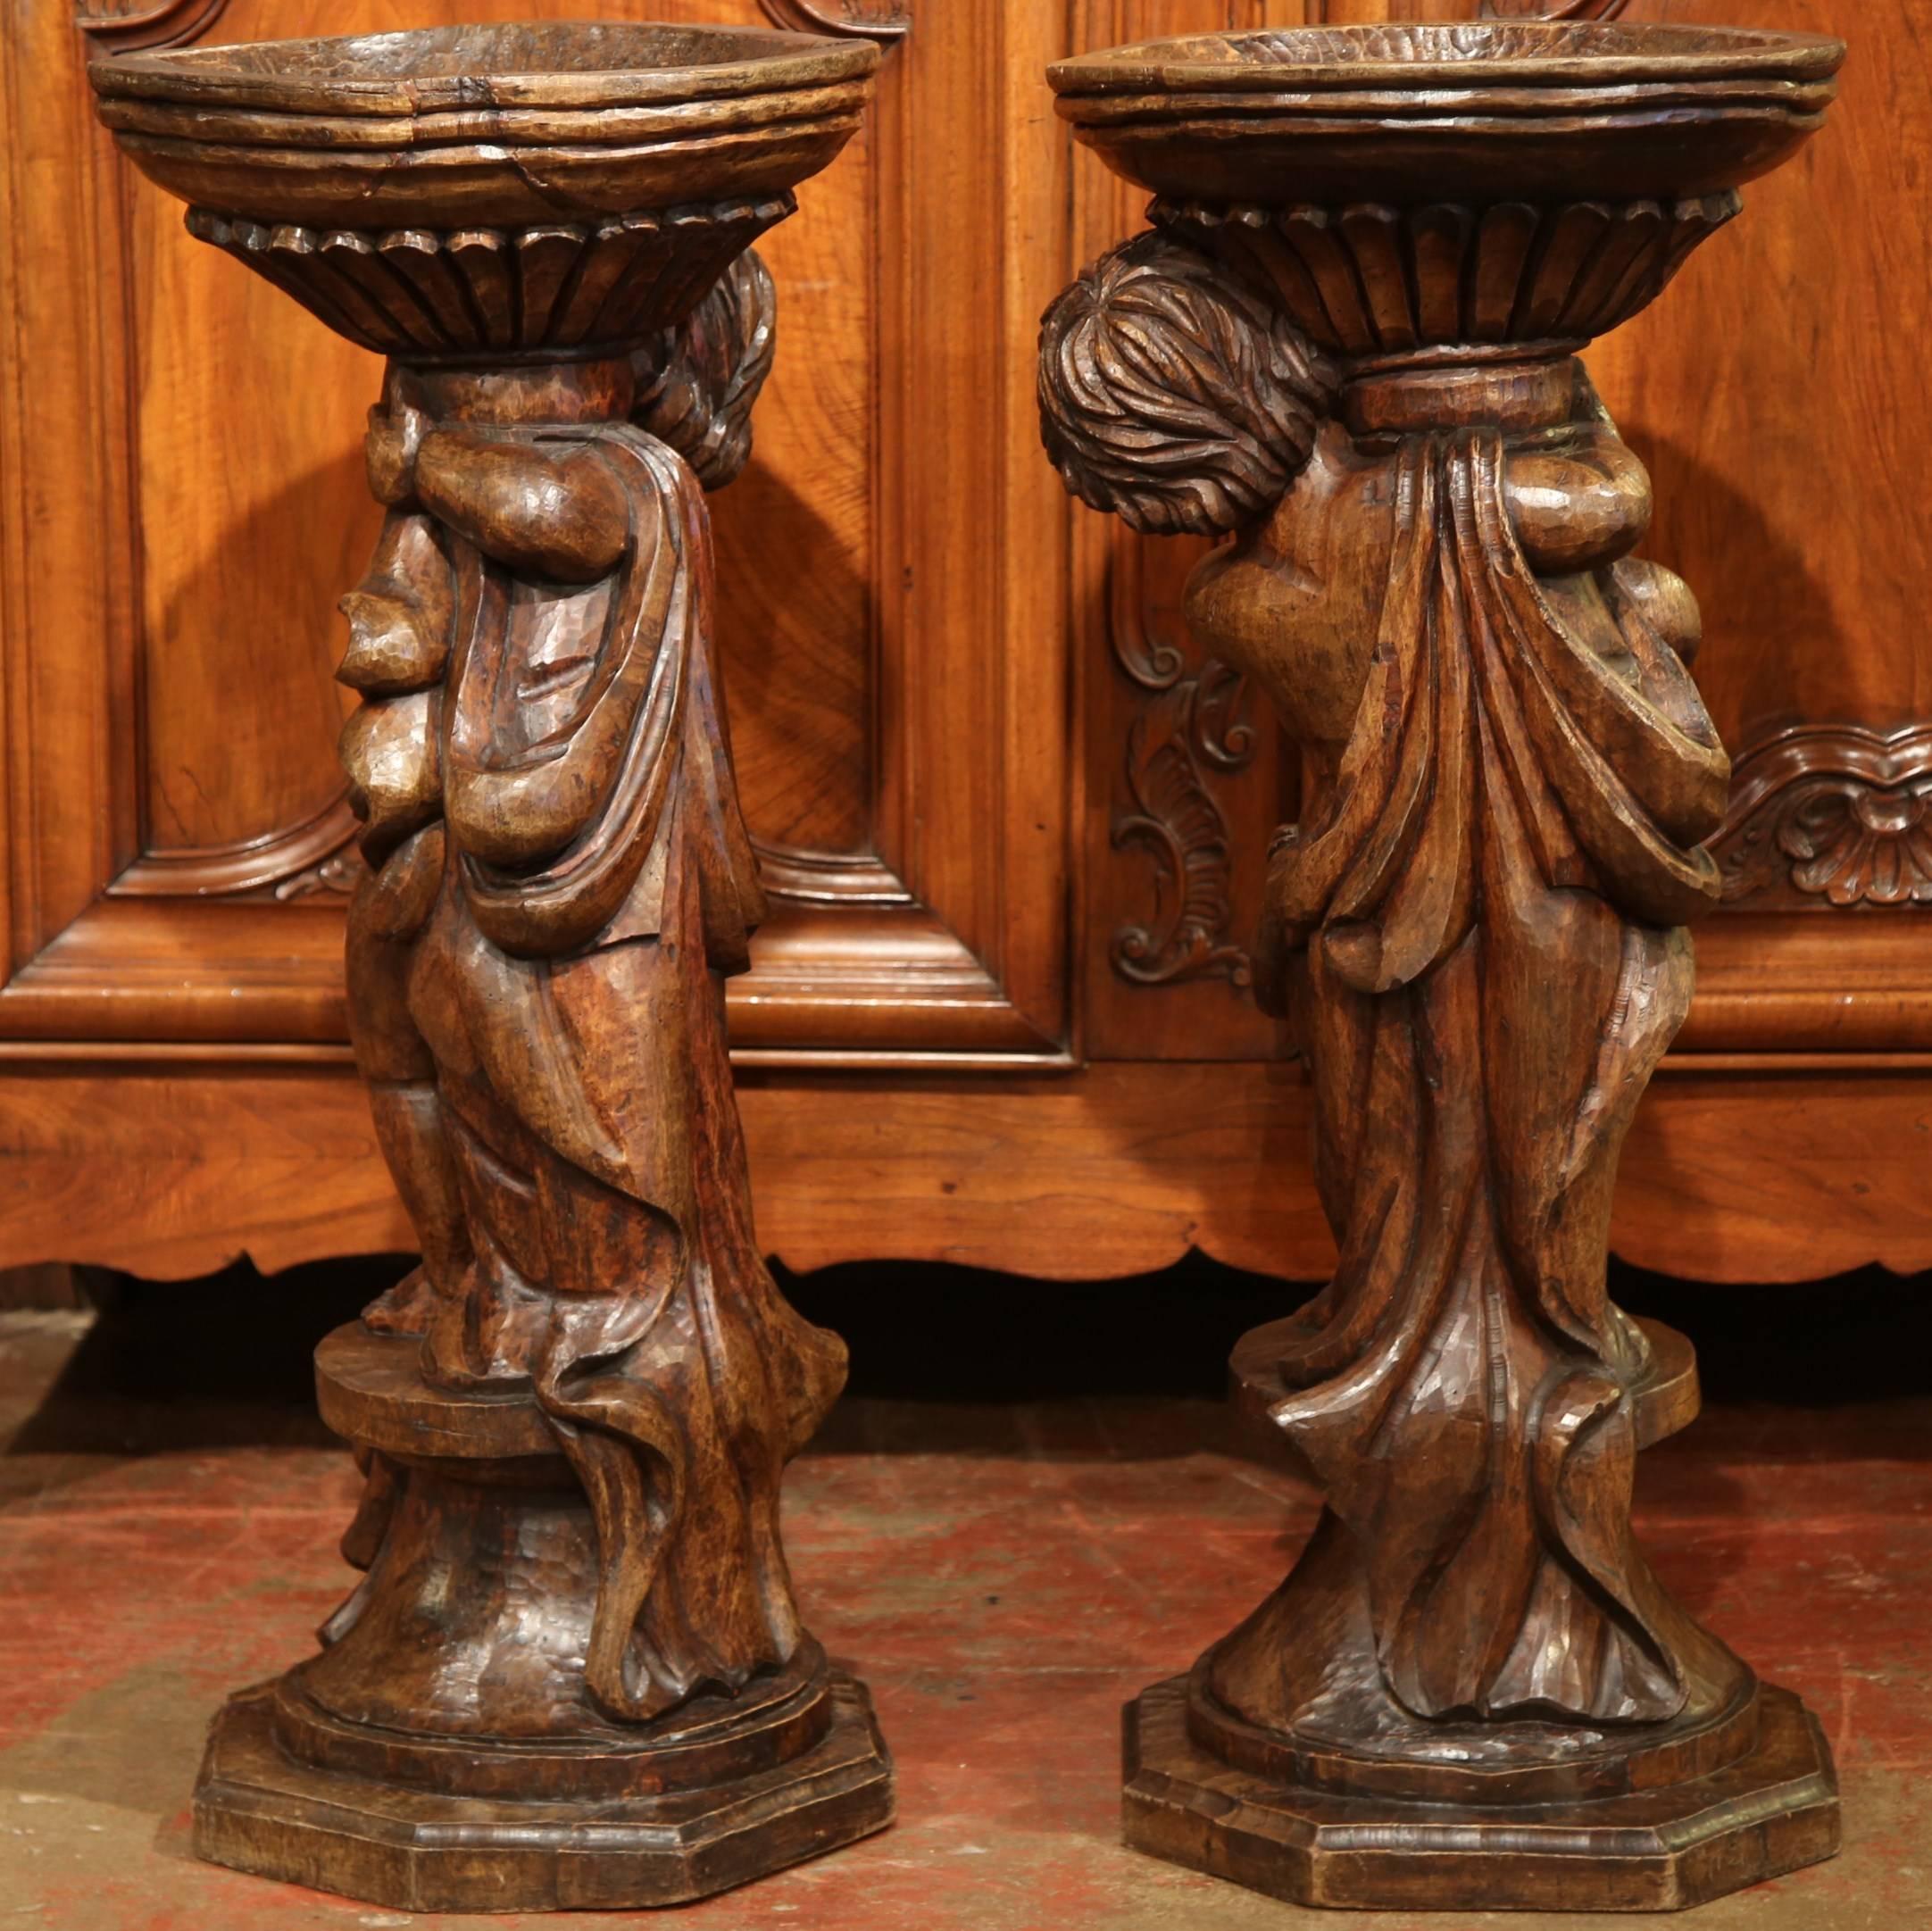 Tall Pair of 18th Century French Hand-Carved Walnut Plant Stands with Cherubs 2